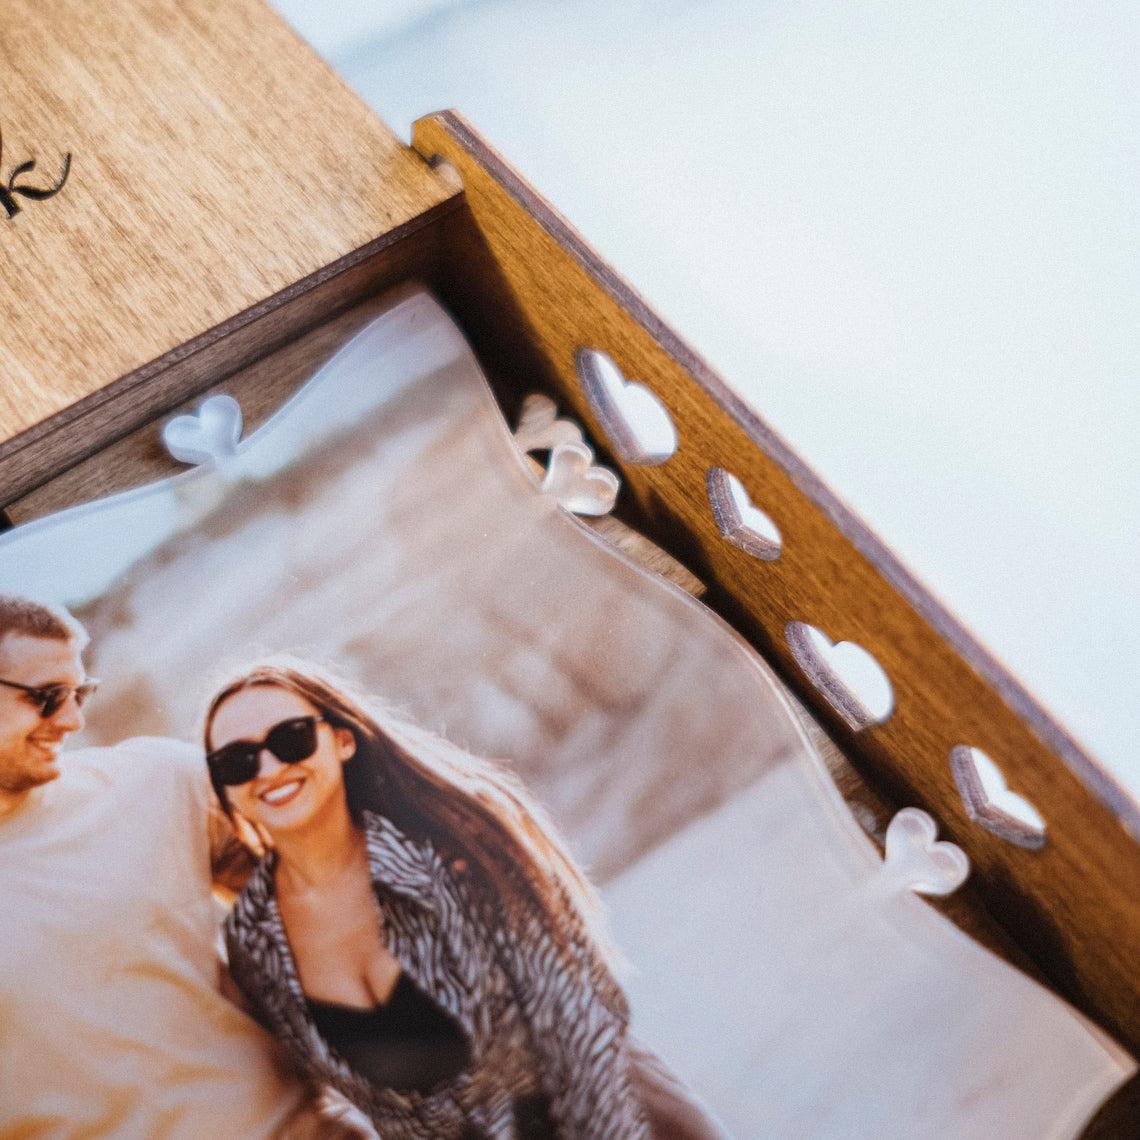 12 Reasons Why I Love You with Photo - Personalized Valentine's Day Gifts